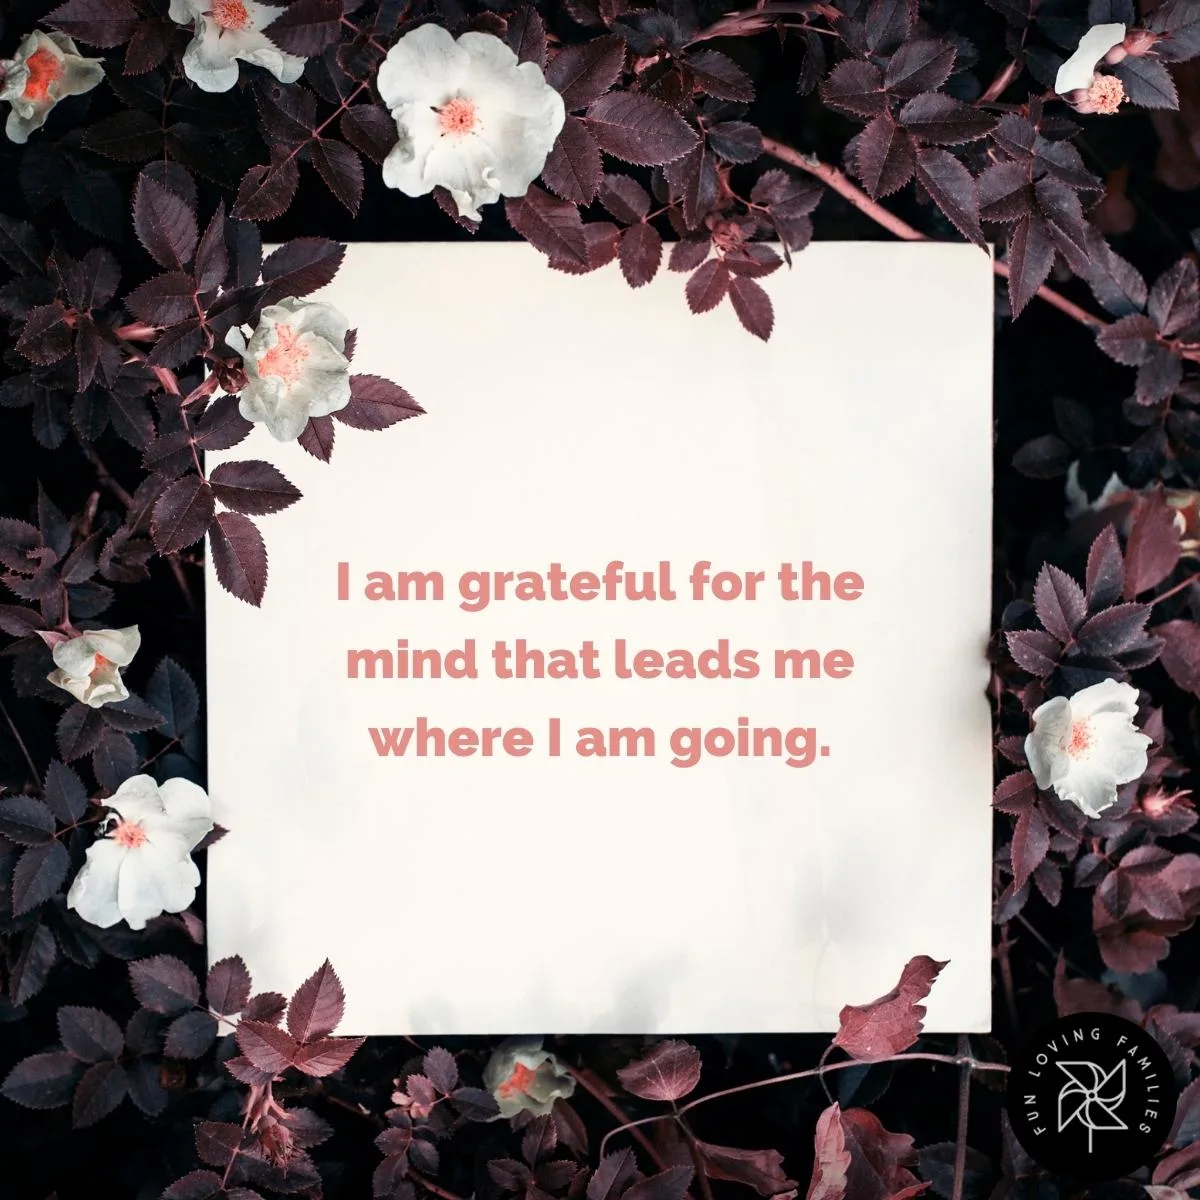 I am grateful for the mind that leads me where I am going affirmation